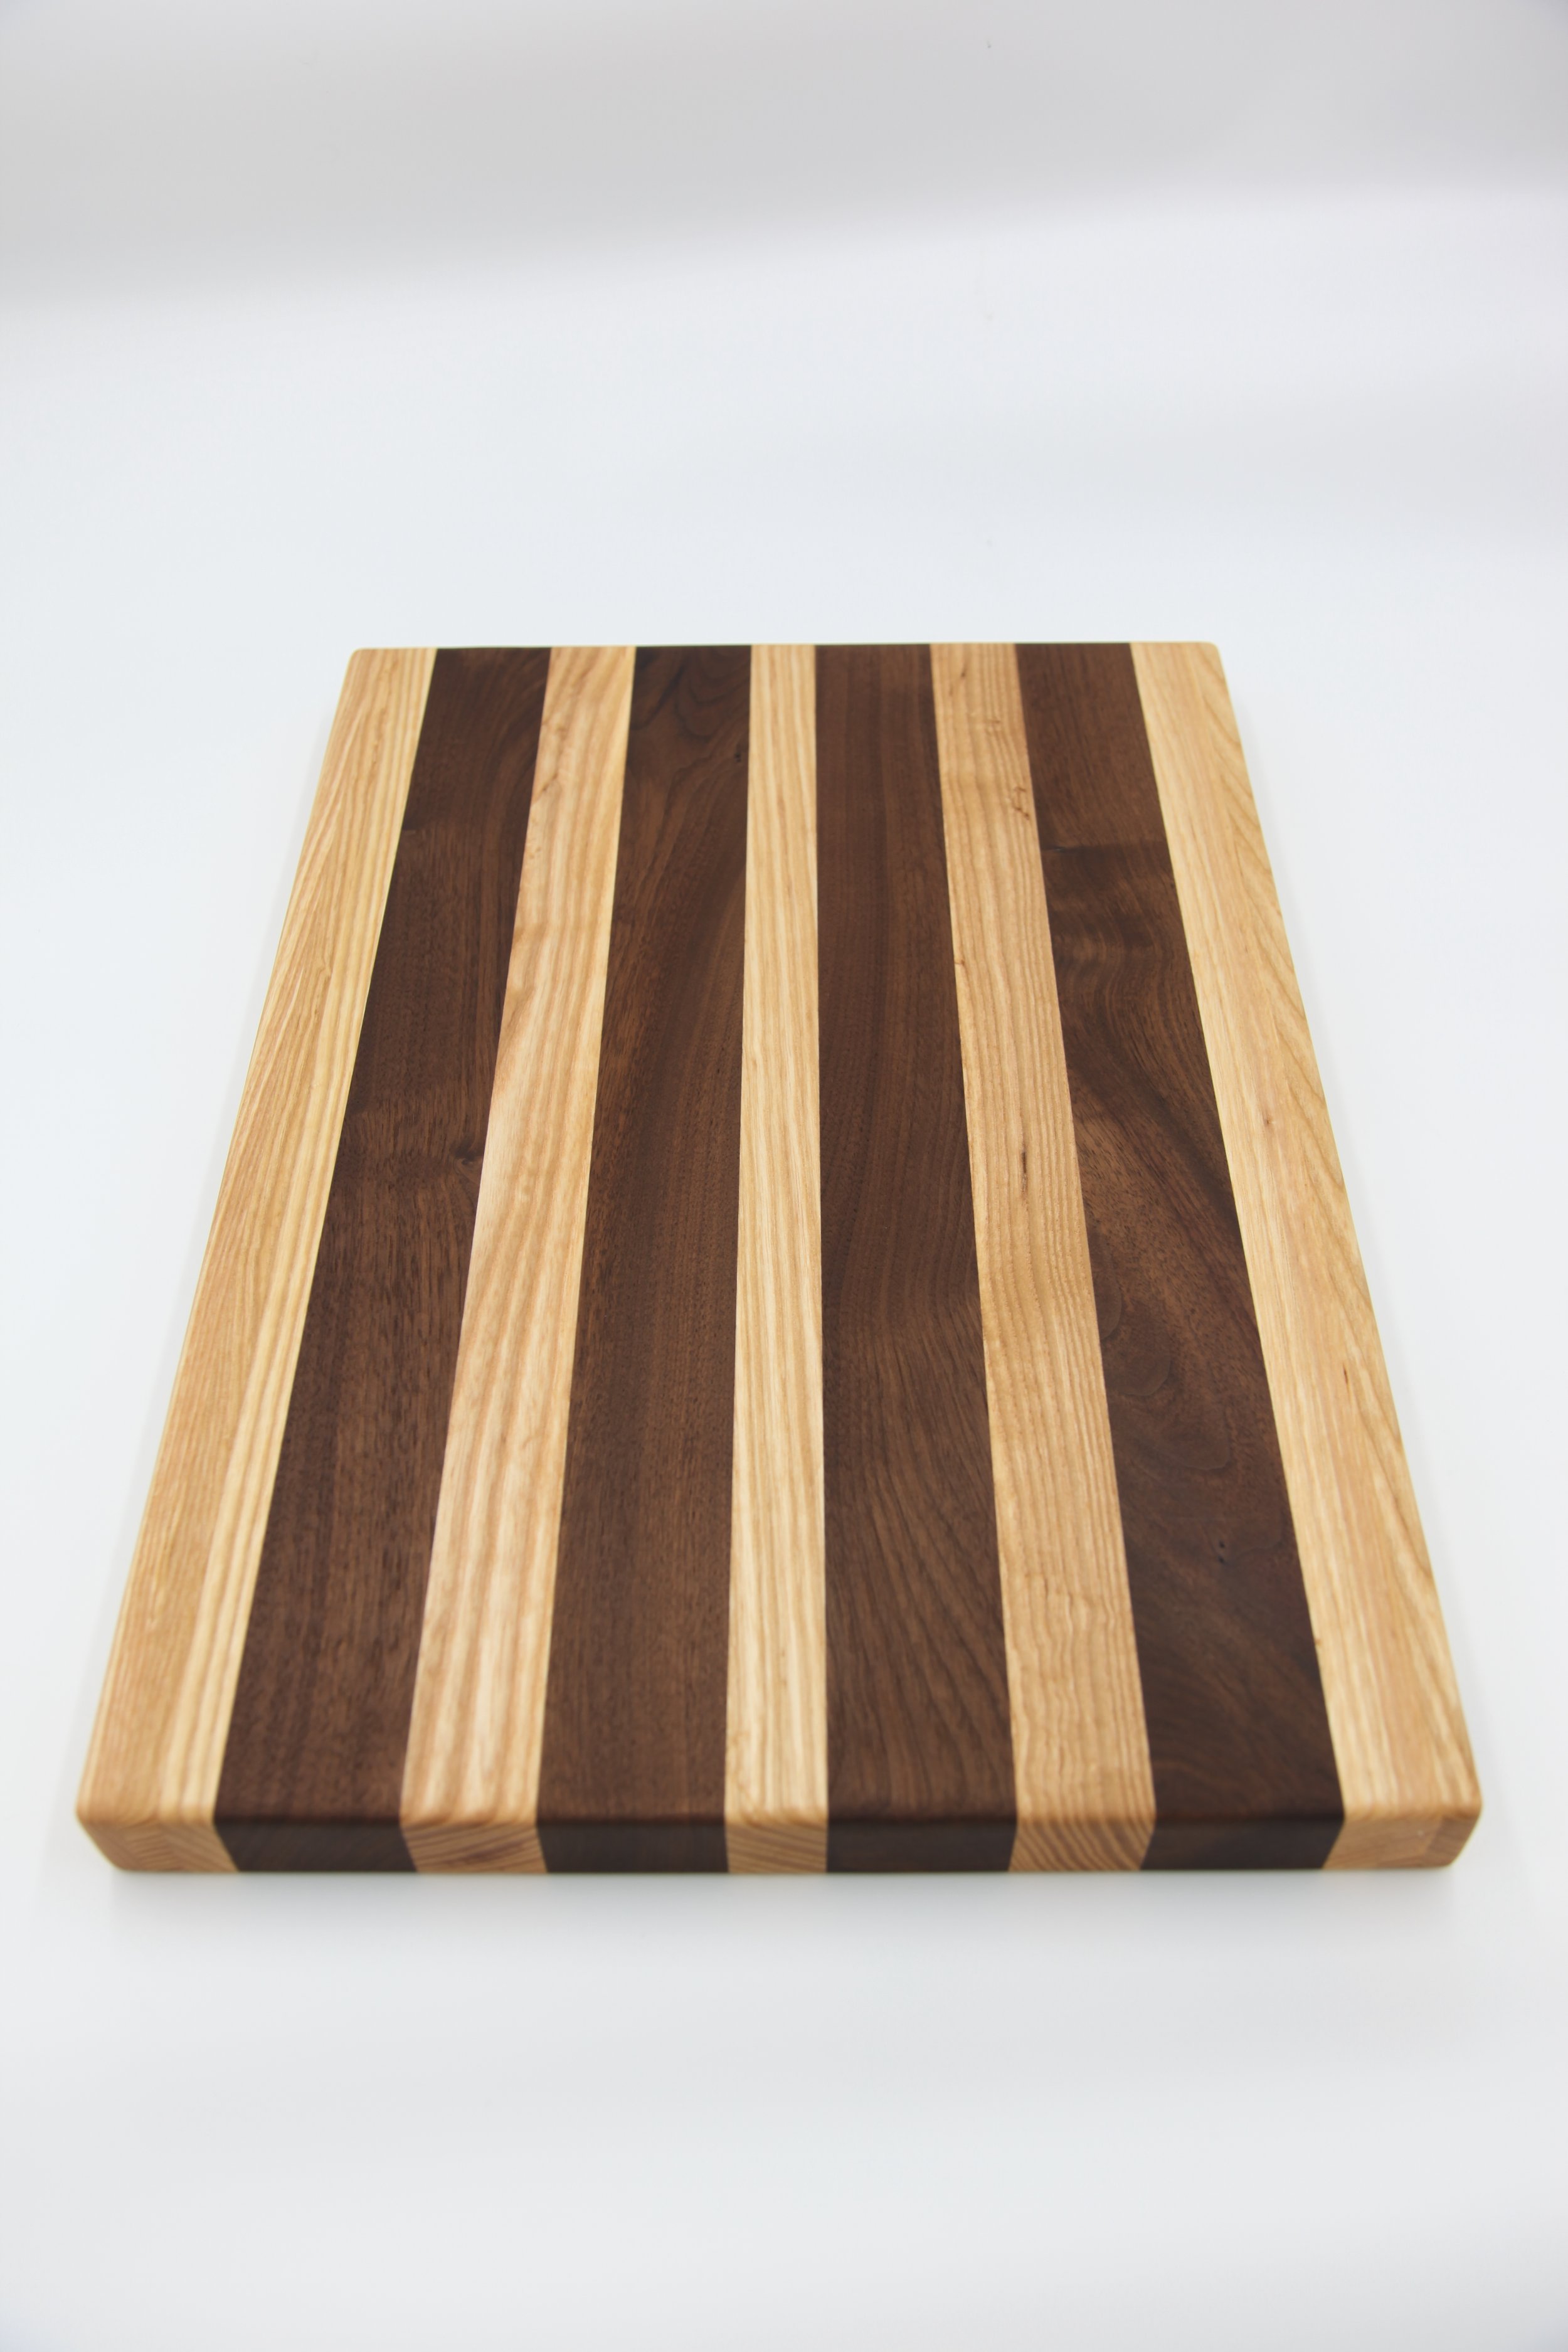 Wood Cutting Board with Walnut and White Ash